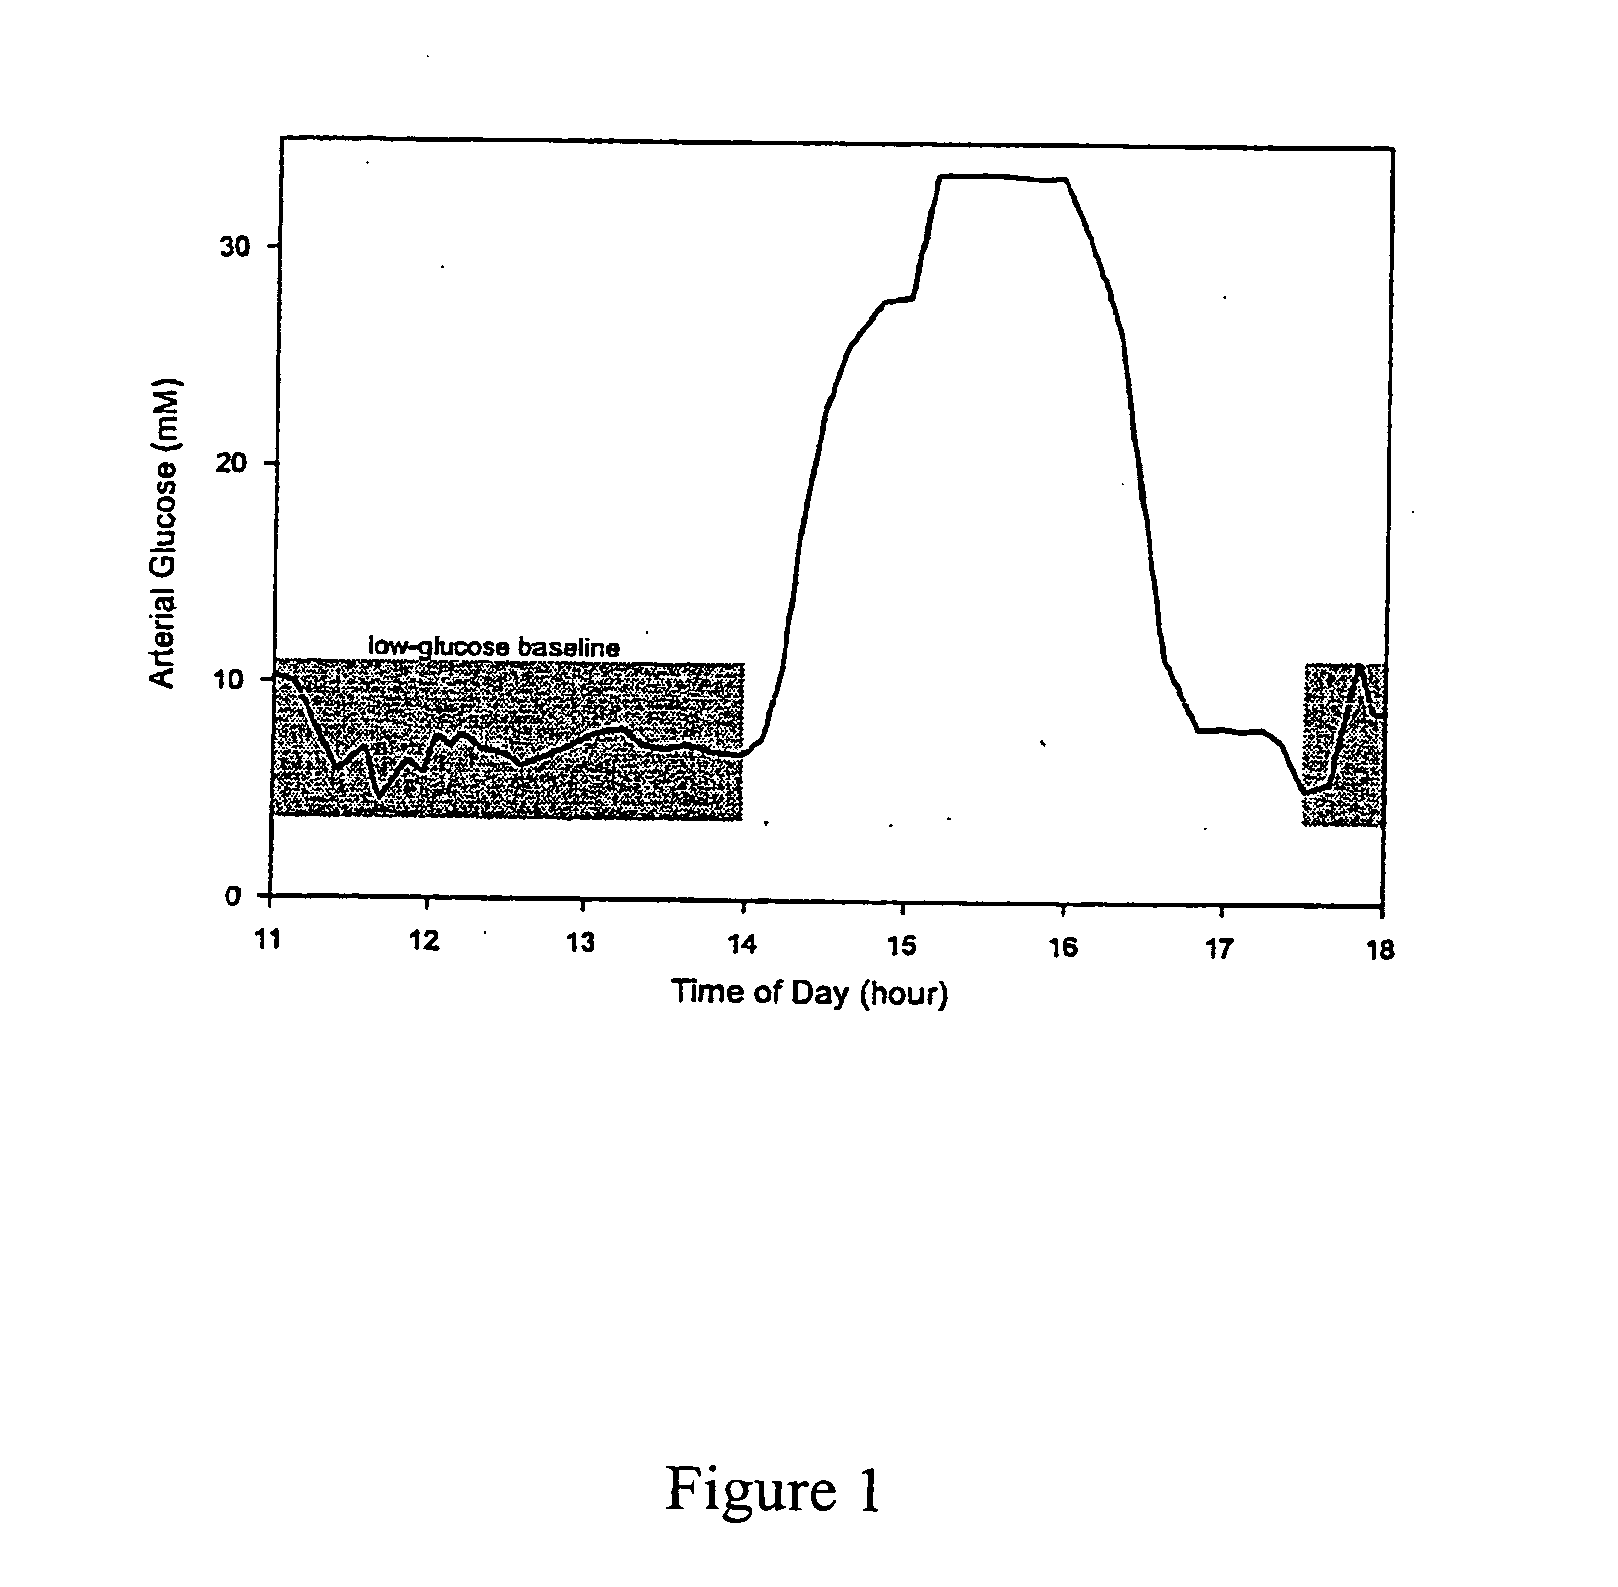 Method for generating a net analyte signal calibration model and uses thereof